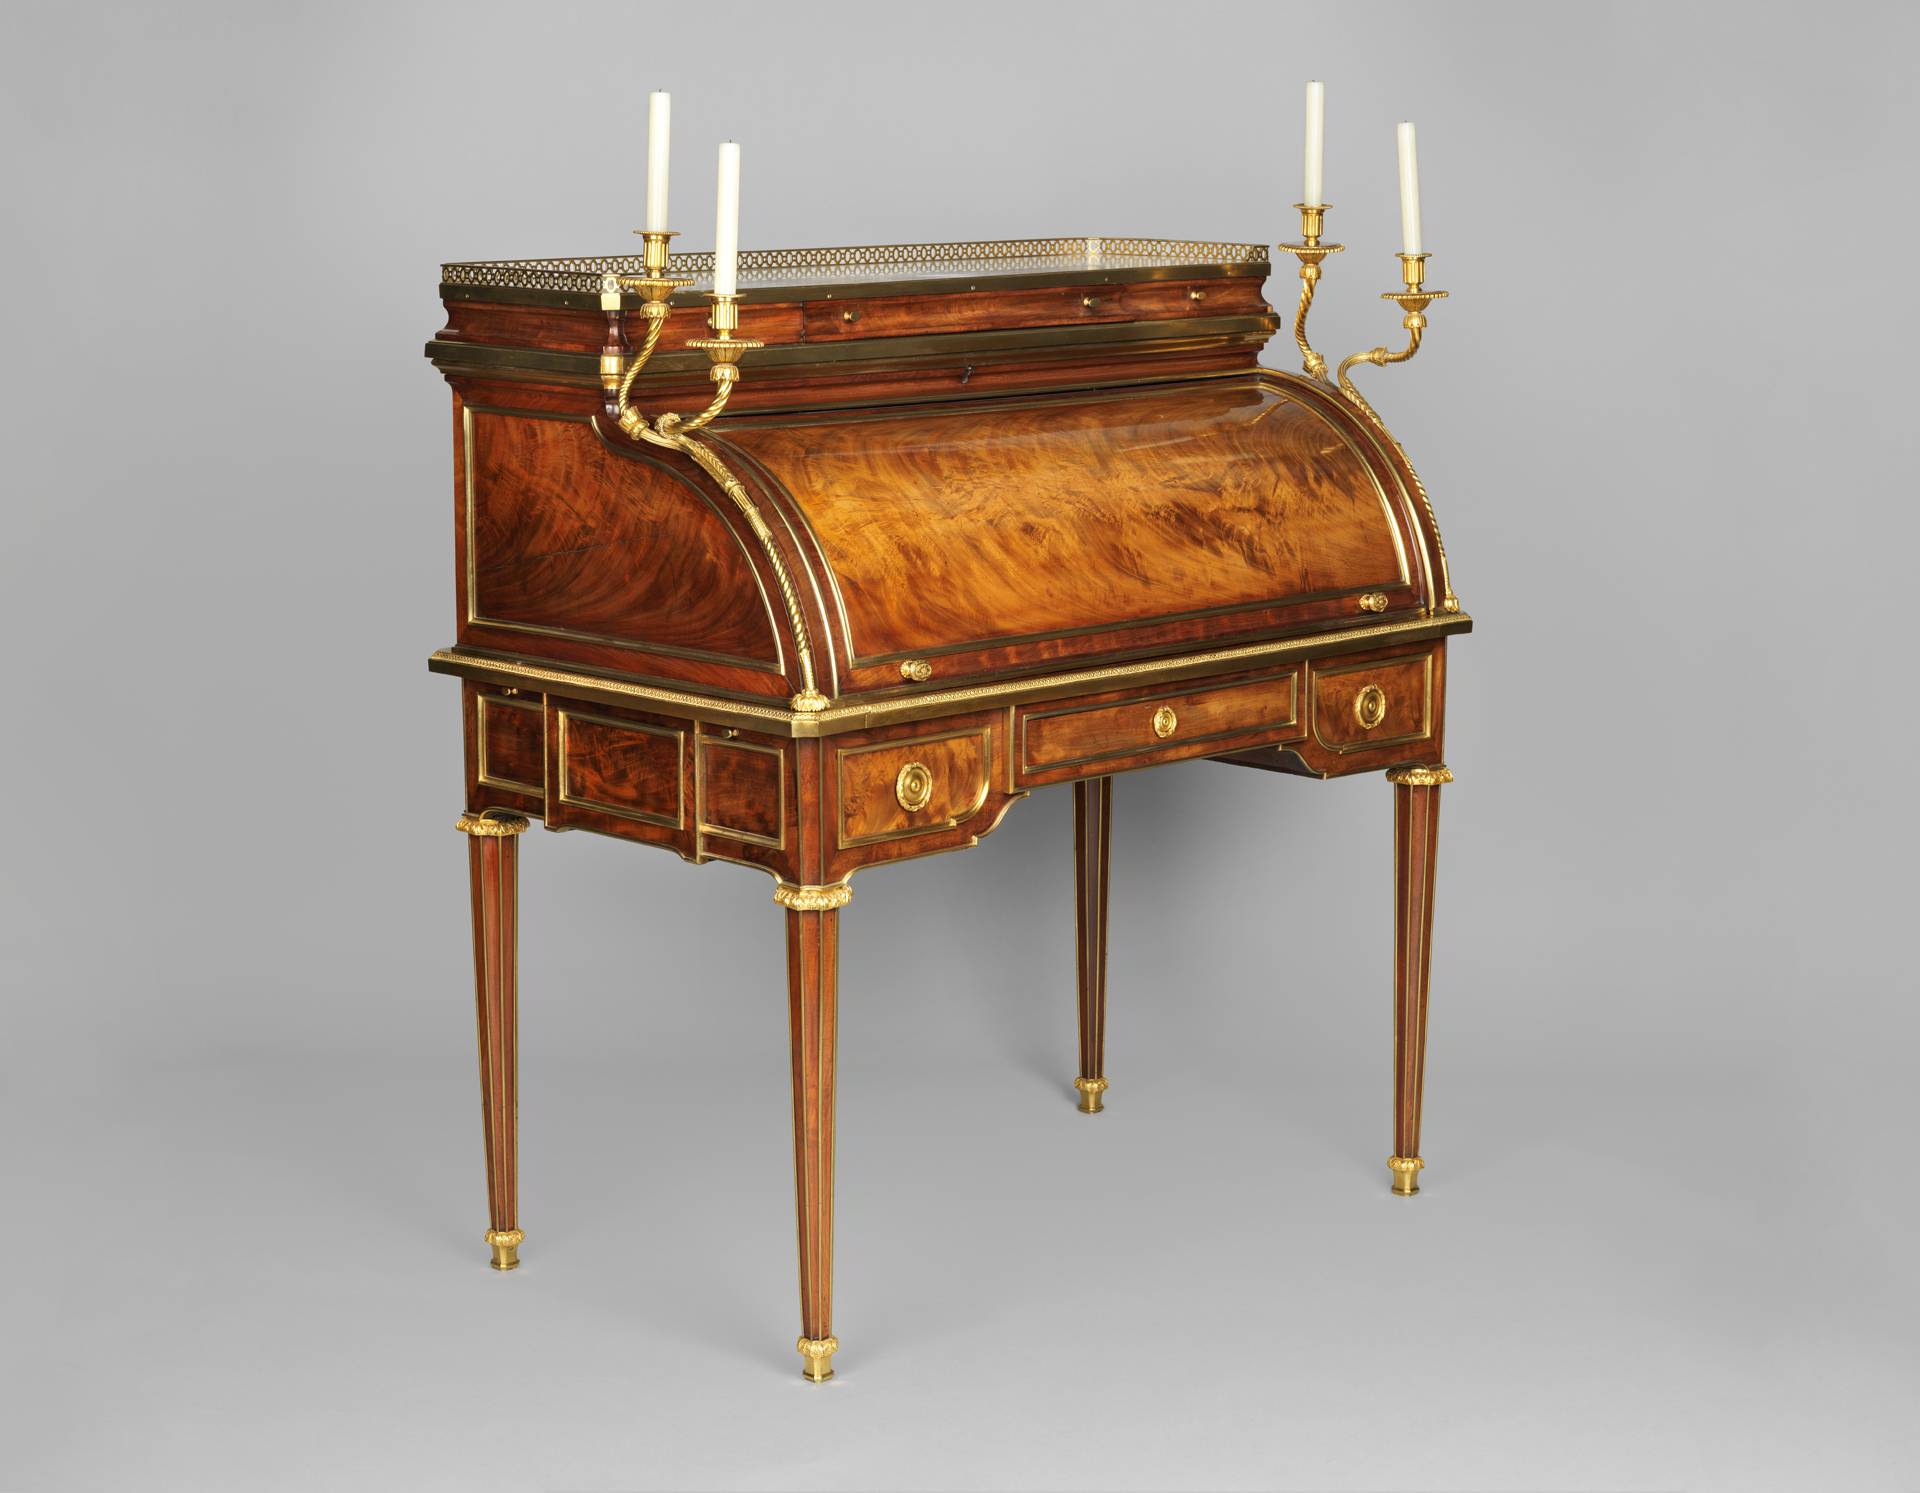 Riesener: The - Wallace Collection